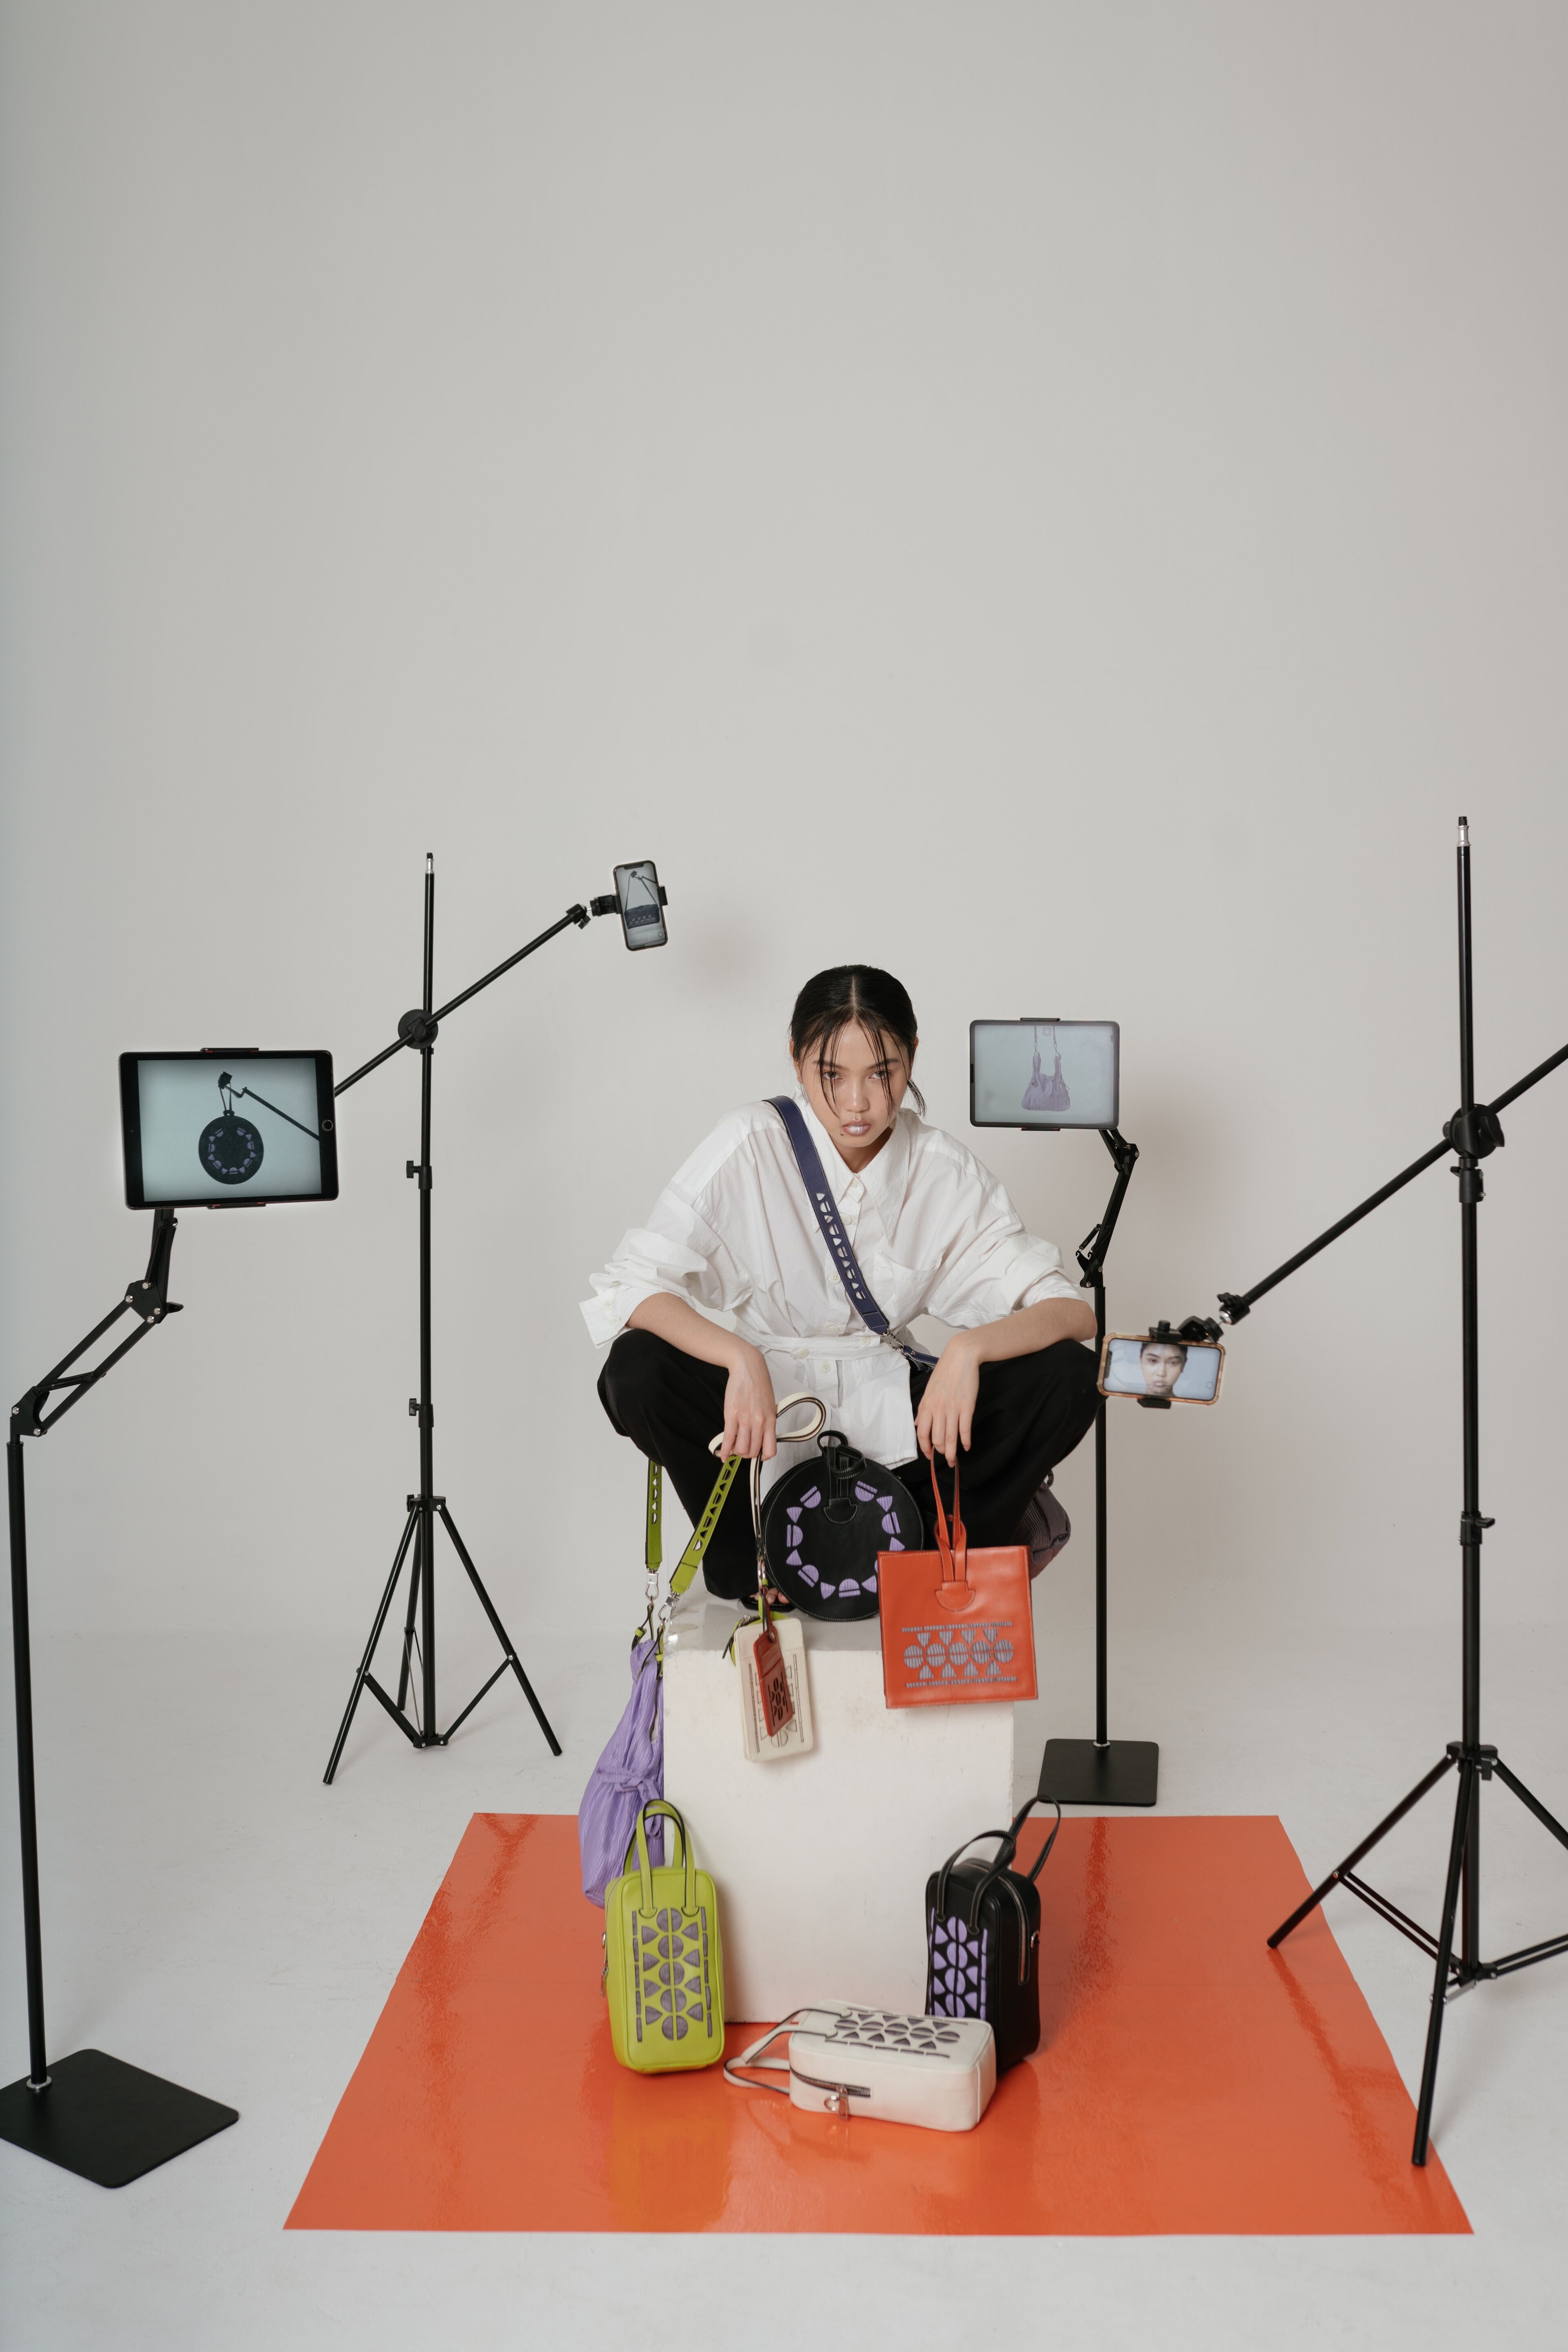 A model sits on an orange square mat, surrounded by camera equipment, posing with a collection of colorful handbags.